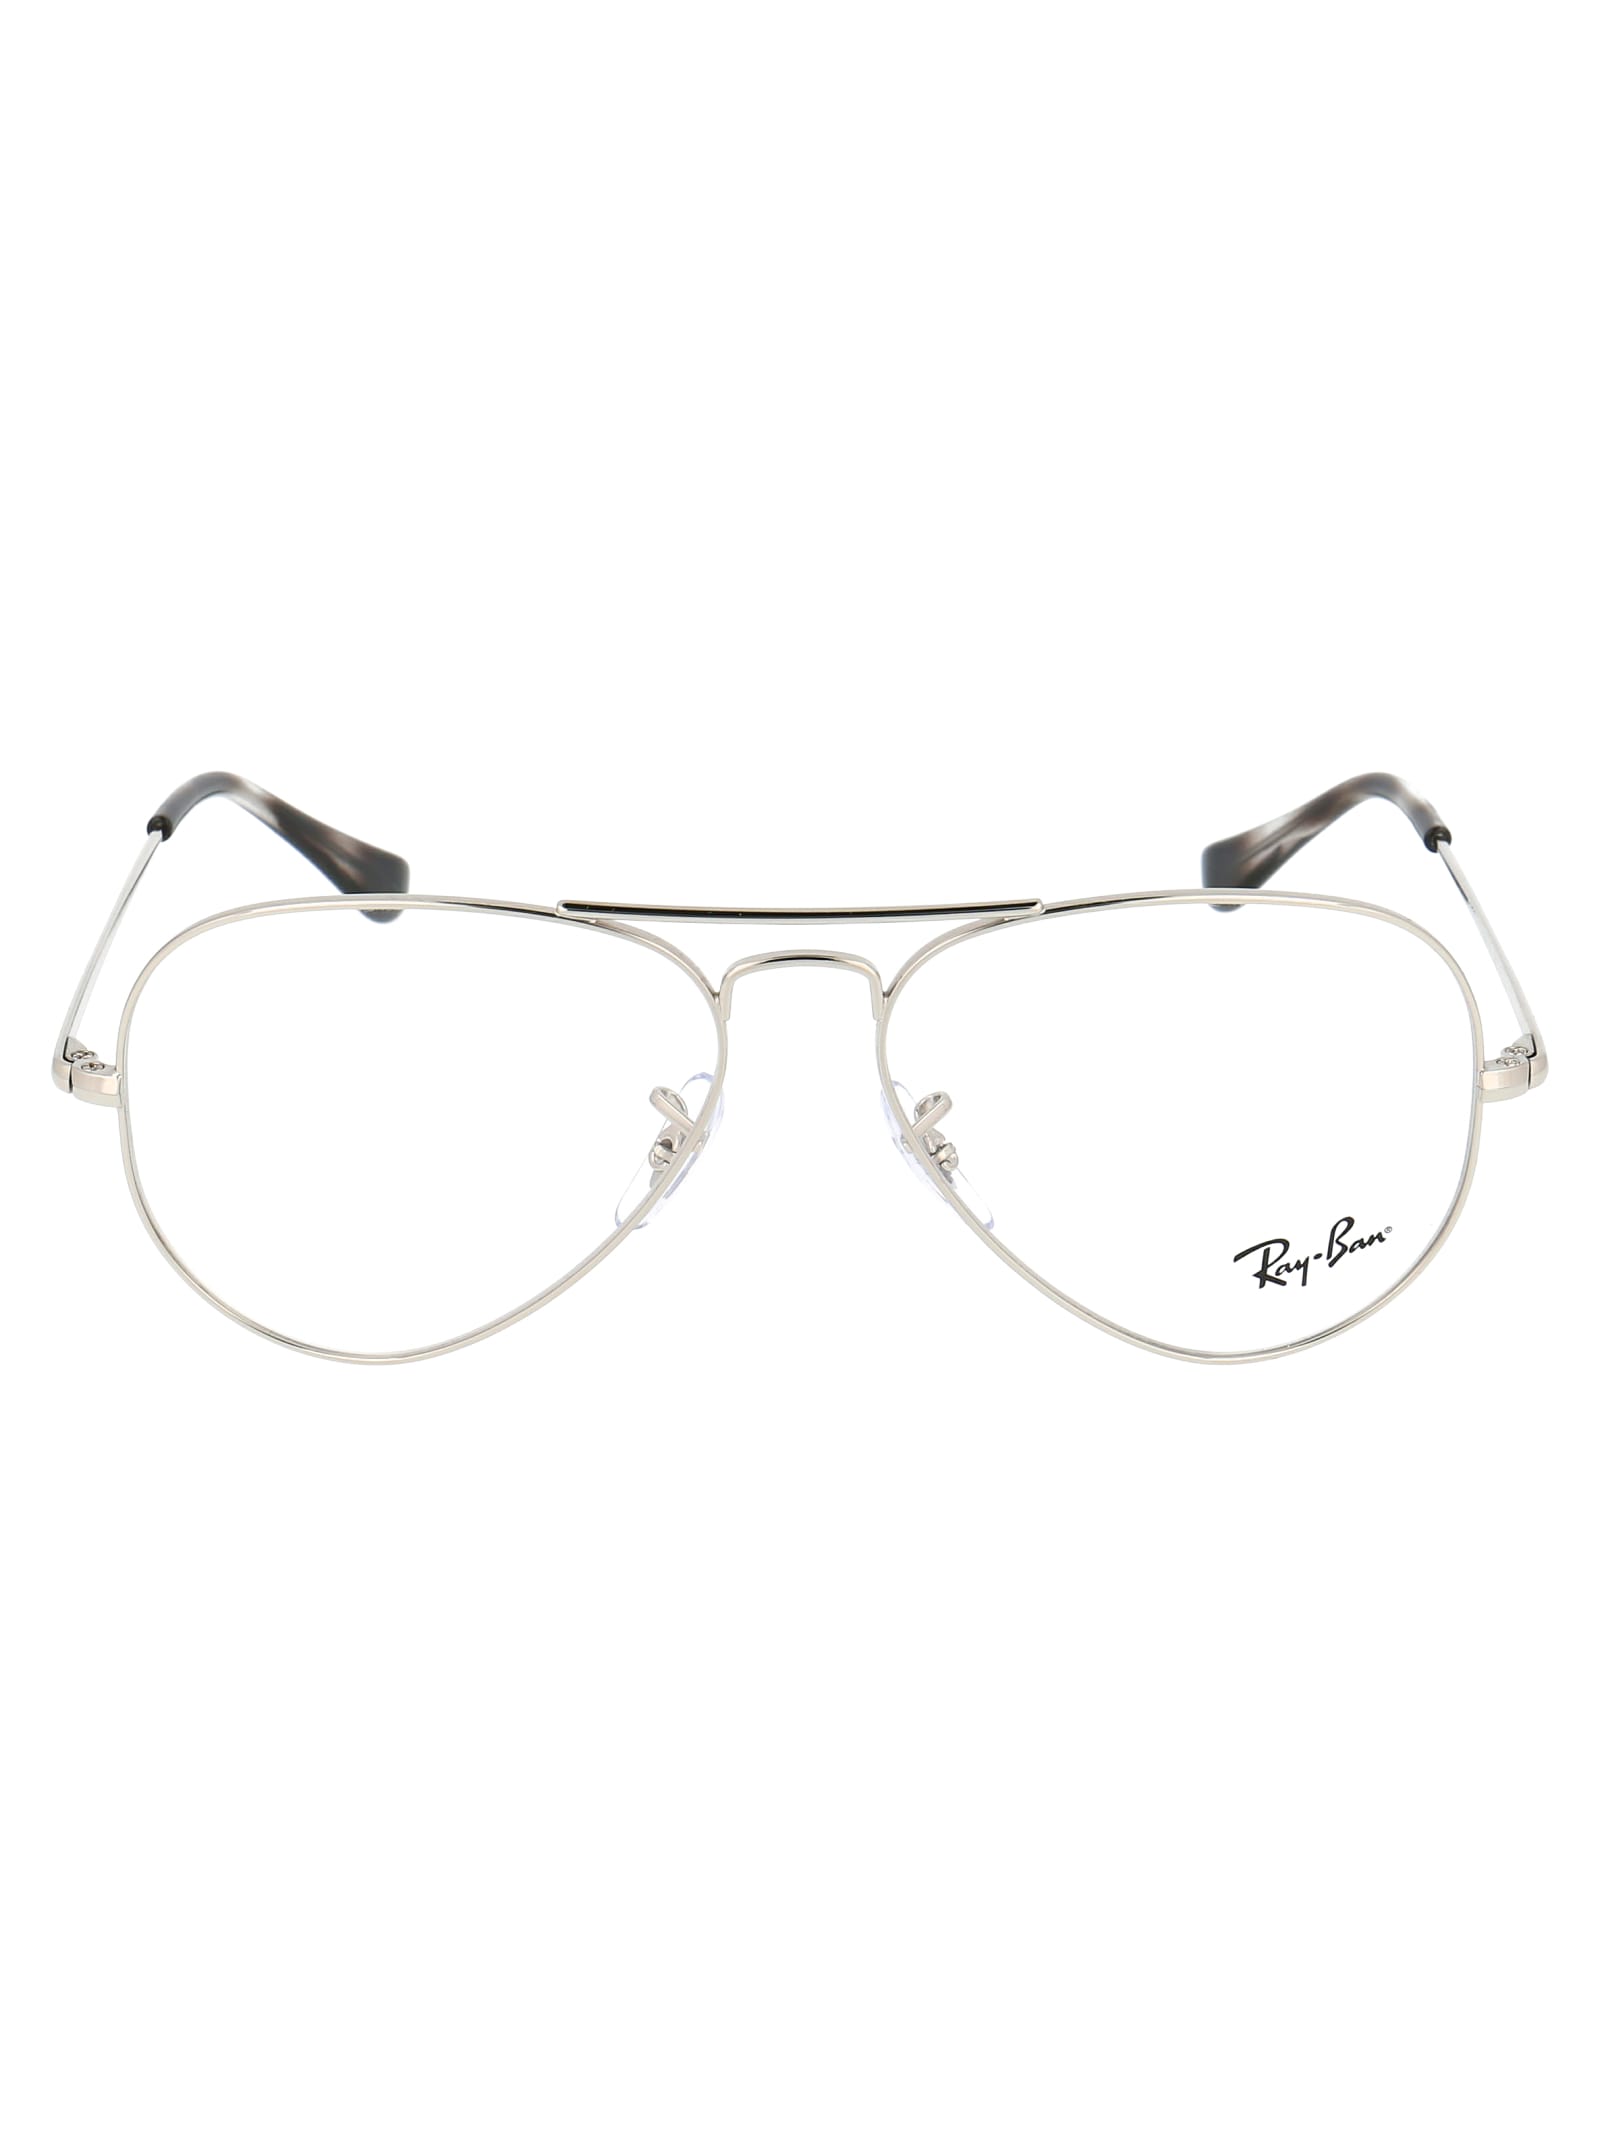 Ray Ban Aviator Glasses In 2501 Silver